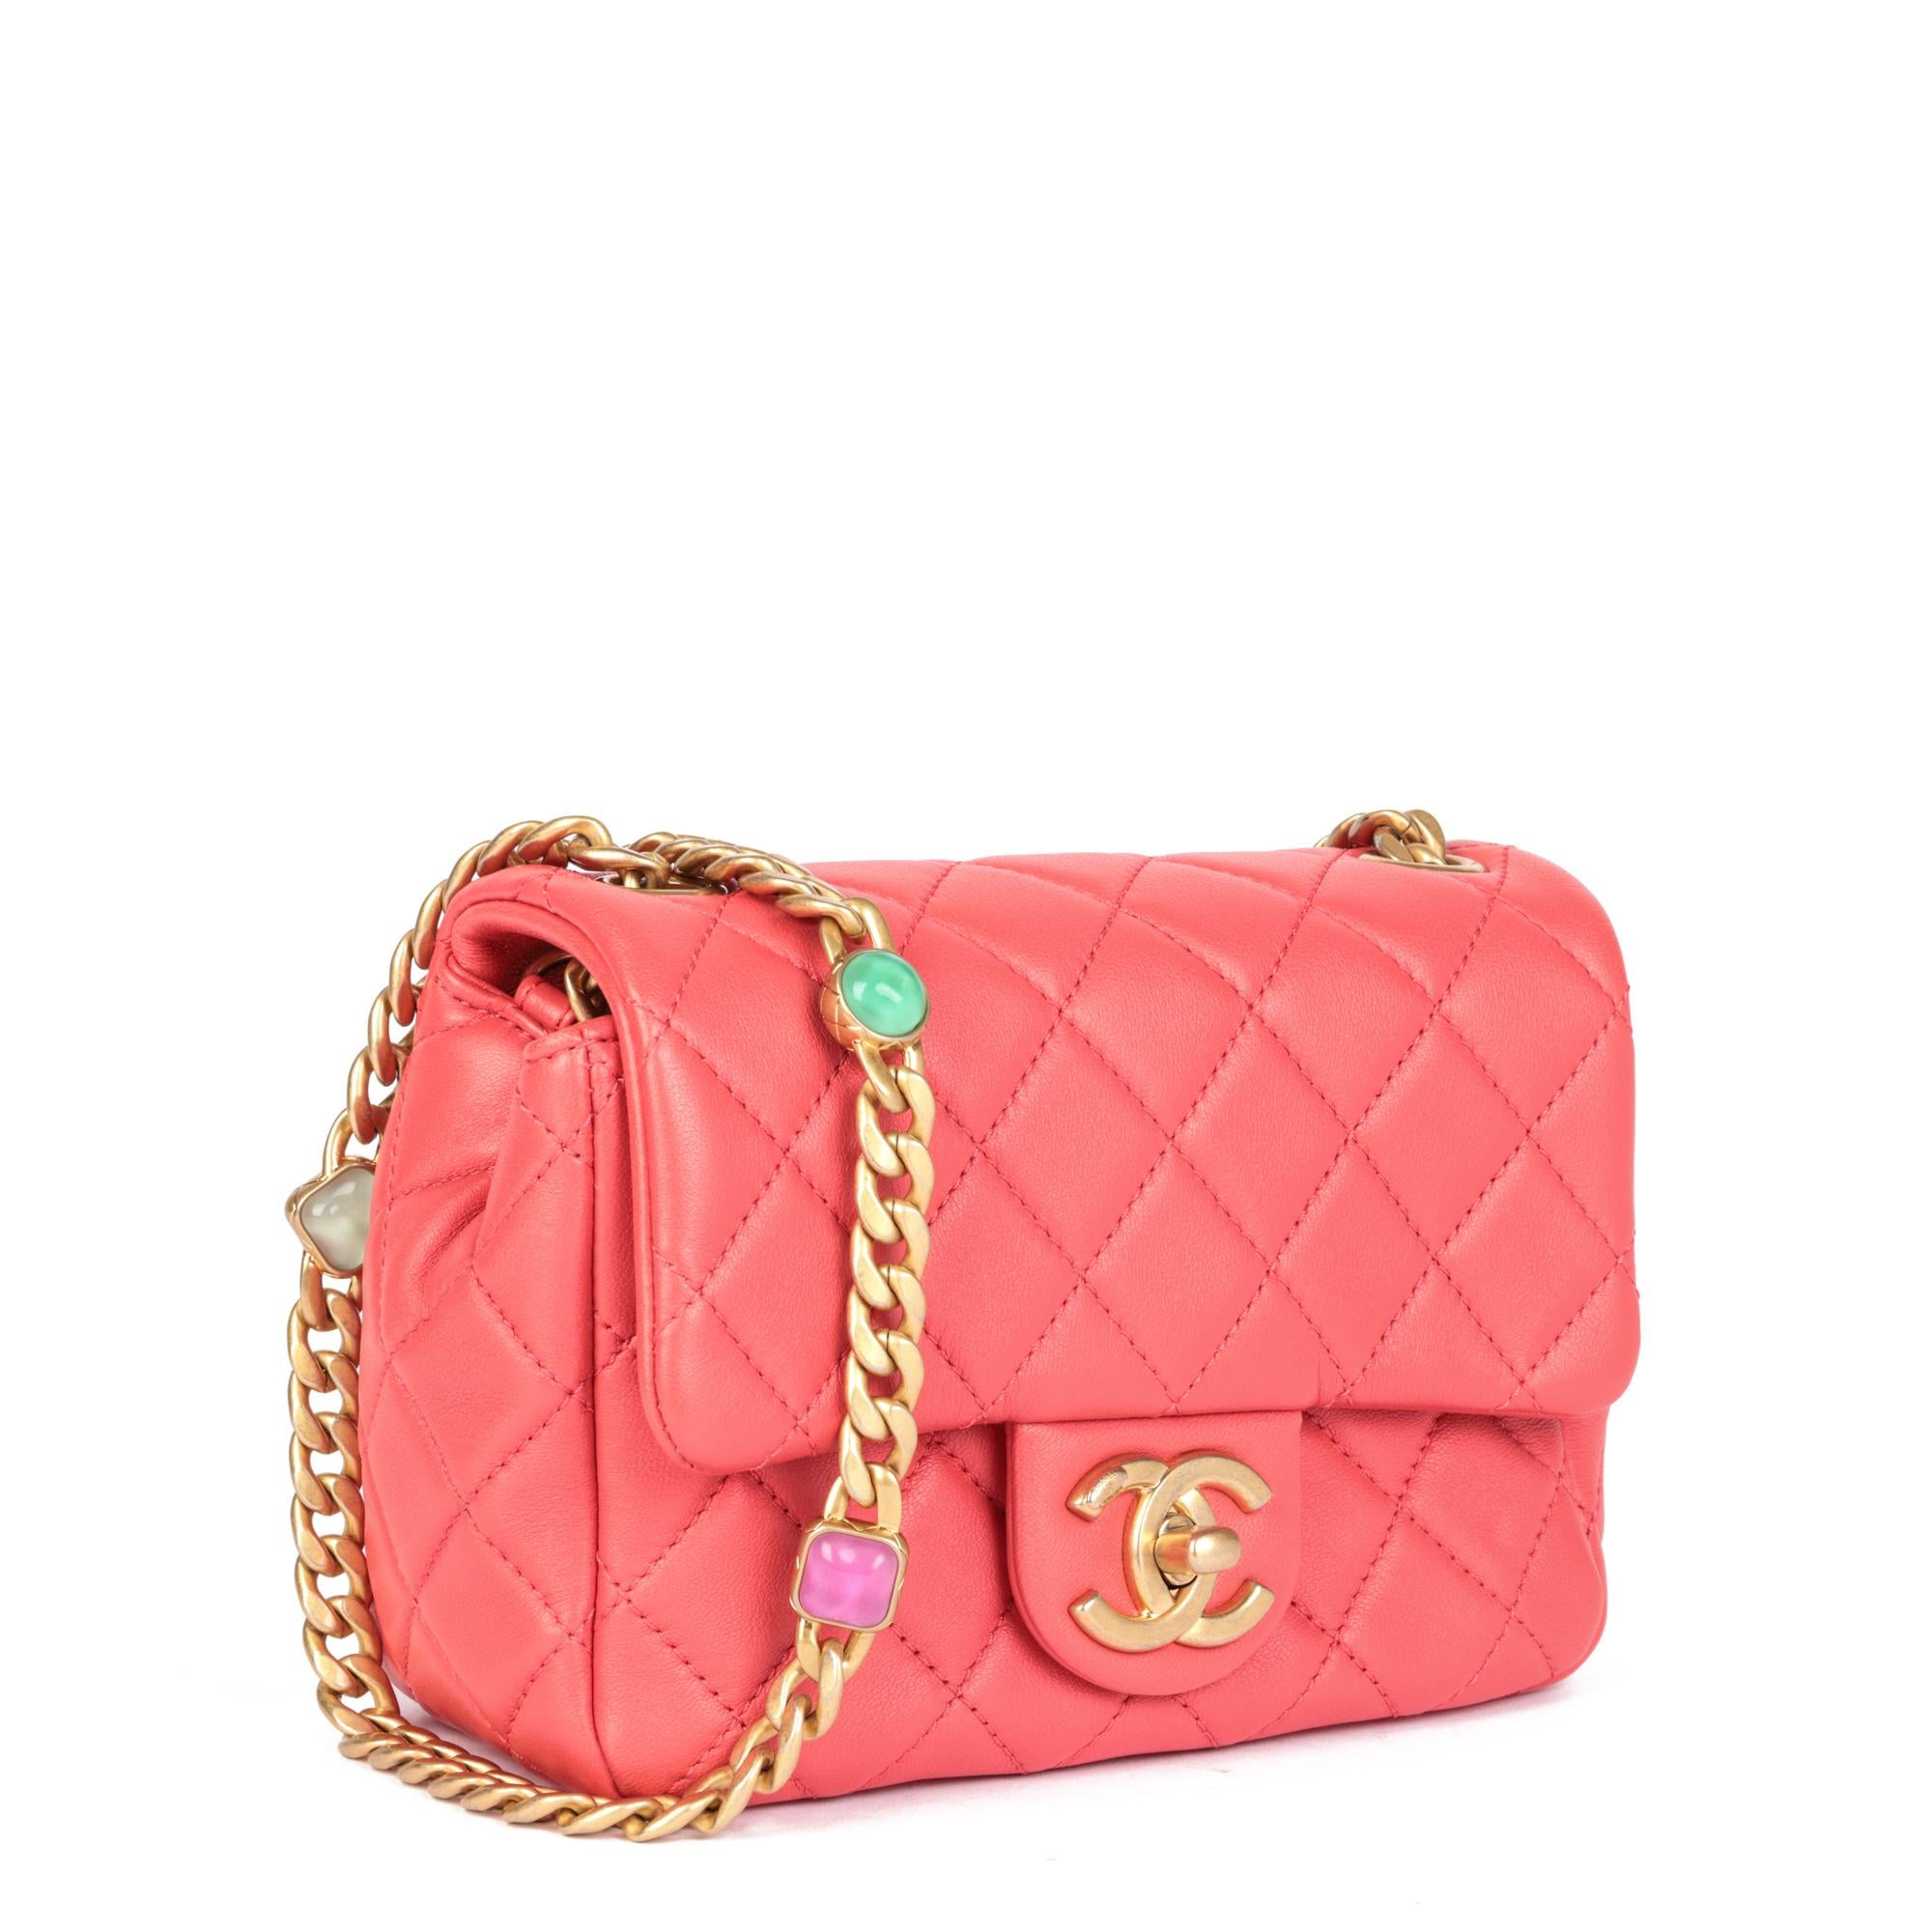 CHANEL
Coral Red Quilted Lambskin Jewels Square Mini Flap Bag

Serial Number: 31132857
Age (Circa): 2020
Accompanied By: Chanel Dust Bag, Box, Authenticity Card, Ribbon, Care Card
Authenticity Details: Authenticity Card, Serial Sticker (Made in